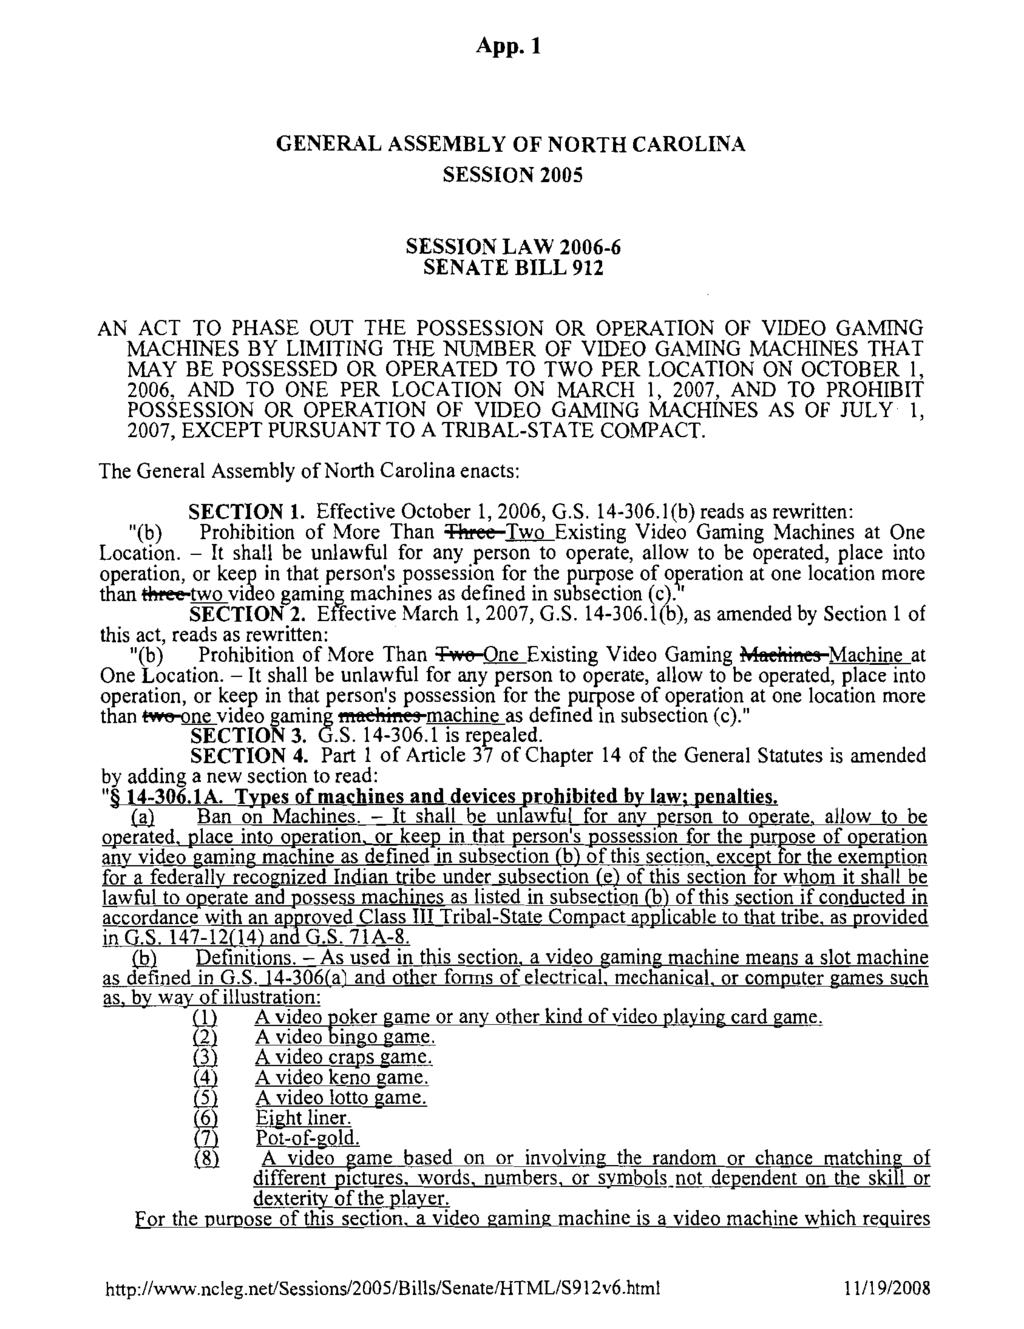 GENEIWL ASSEMBLY OF NORTH CAROLINA SESSION 2005 SESSION LAW 2006-6 SENATE BILL 912 AN ACT TO PHASE OUT THE POSSESSION OR OPERATION OF VIDEO GAMING MACHINES BY LIMITING THE NUMBER OF VIDEO GAMING